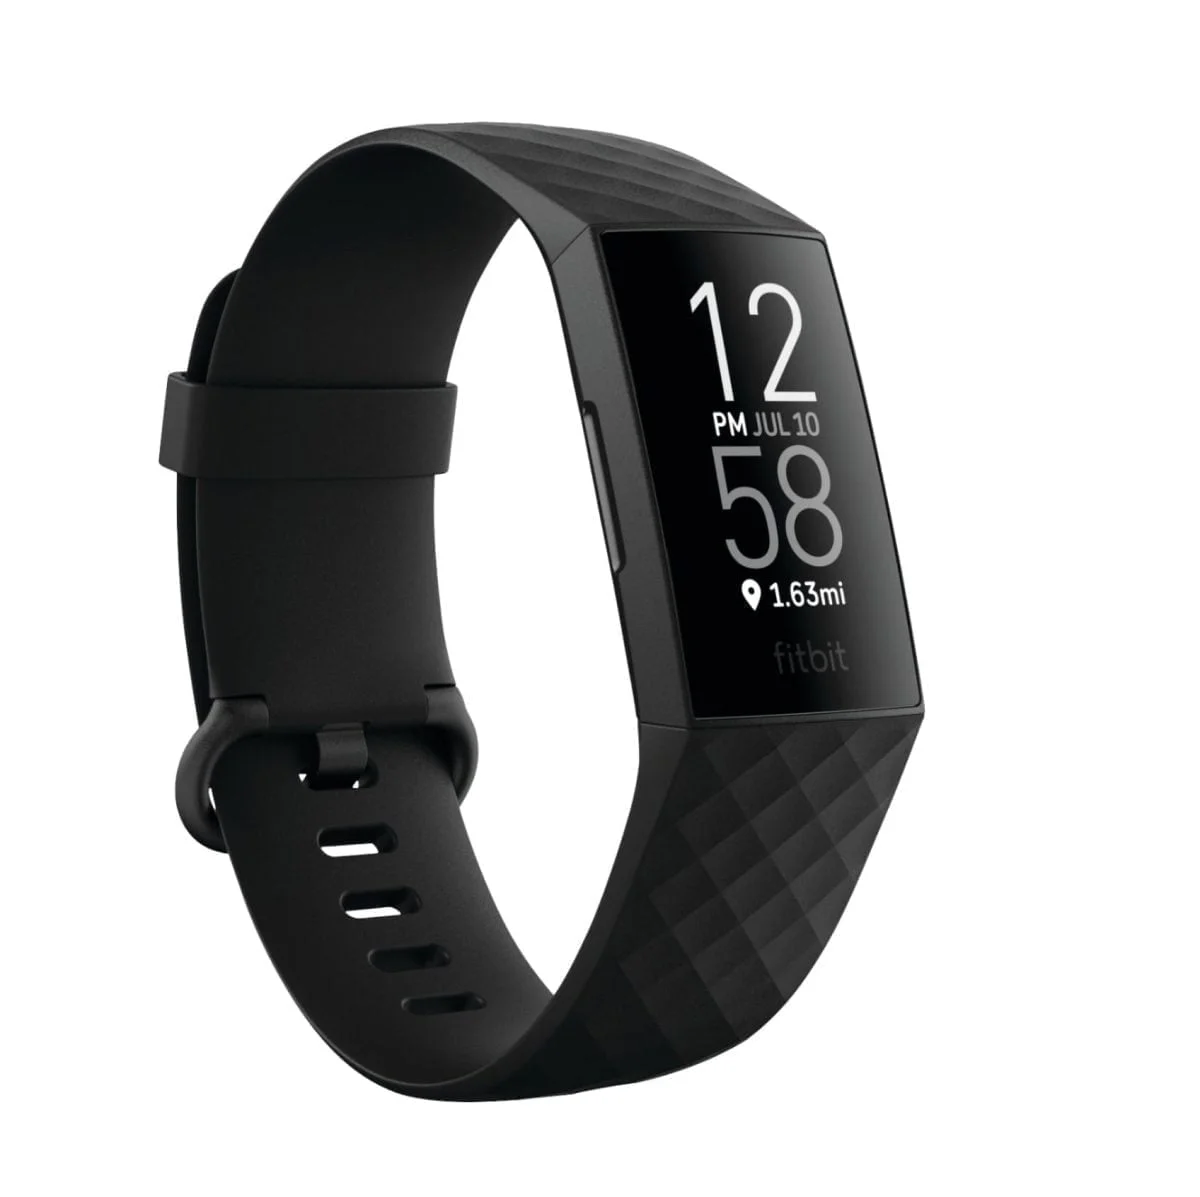 6405752 Rd Fitbit Keep Track Of Time And Listen To Your Favorite Tunes While Exercising With This Black Fitbit Charge 4 Activity Tracker. The Built-In Gps Tracks Your Outdoor Runs, Displaying The Distance Covered, While The Intuitive Touchscreen Delivers Vivid Visuals And Easy Operation. This Fitbit Charge 4 Activity Tracker Has A Rechargeable Battery That Offers Up To 7 Days Of Use, And The Swim-Proof Design Lets You Log Pool Workouts. &Amp;Lt;Ul&Amp;Gt; &Amp;Lt;Li&Amp;Gt;Measures Calories Burned And Heart Rate&Amp;Lt;/Li&Amp;Gt; &Amp;Lt;Li&Amp;Gt;Comprehensive Monitoring&Amp;Lt;/Li&Amp;Gt; &Amp;Lt;Li&Amp;Gt;Sleep Tracking&Amp;Lt;/Li&Amp;Gt; &Amp;Lt;Li&Amp;Gt;Backlit Led Display&Amp;Lt;/Li&Amp;Gt; &Amp;Lt;Li&Amp;Gt;Fitbit Pay&Amp;Lt;/Li&Amp;Gt; &Amp;Lt;Li&Amp;Gt;Active Zone Minutes&Amp;Lt;/Li&Amp;Gt; &Amp;Lt;Li&Amp;Gt;Built-In Gps&Amp;Lt;/Li&Amp;Gt; &Amp;Lt;Li&Amp;Gt;Water-Resistant Design&Amp;Lt;/Li&Amp;Gt; &Amp;Lt;Li&Amp;Gt;Syncs To Select Apple® And Android Devices&Amp;Lt;/Li&Amp;Gt; &Amp;Lt;Li&Amp;Gt;Rechargeable Battery&Amp;Lt;/Li&Amp;Gt; &Amp;Lt;/Ul&Amp;Gt; Fitbit - Charge 4 Activity Tracker Gps + Heart Rate - Black Fitbit - Charge 4 Activity Tracker Gps + Heart Rate - Black